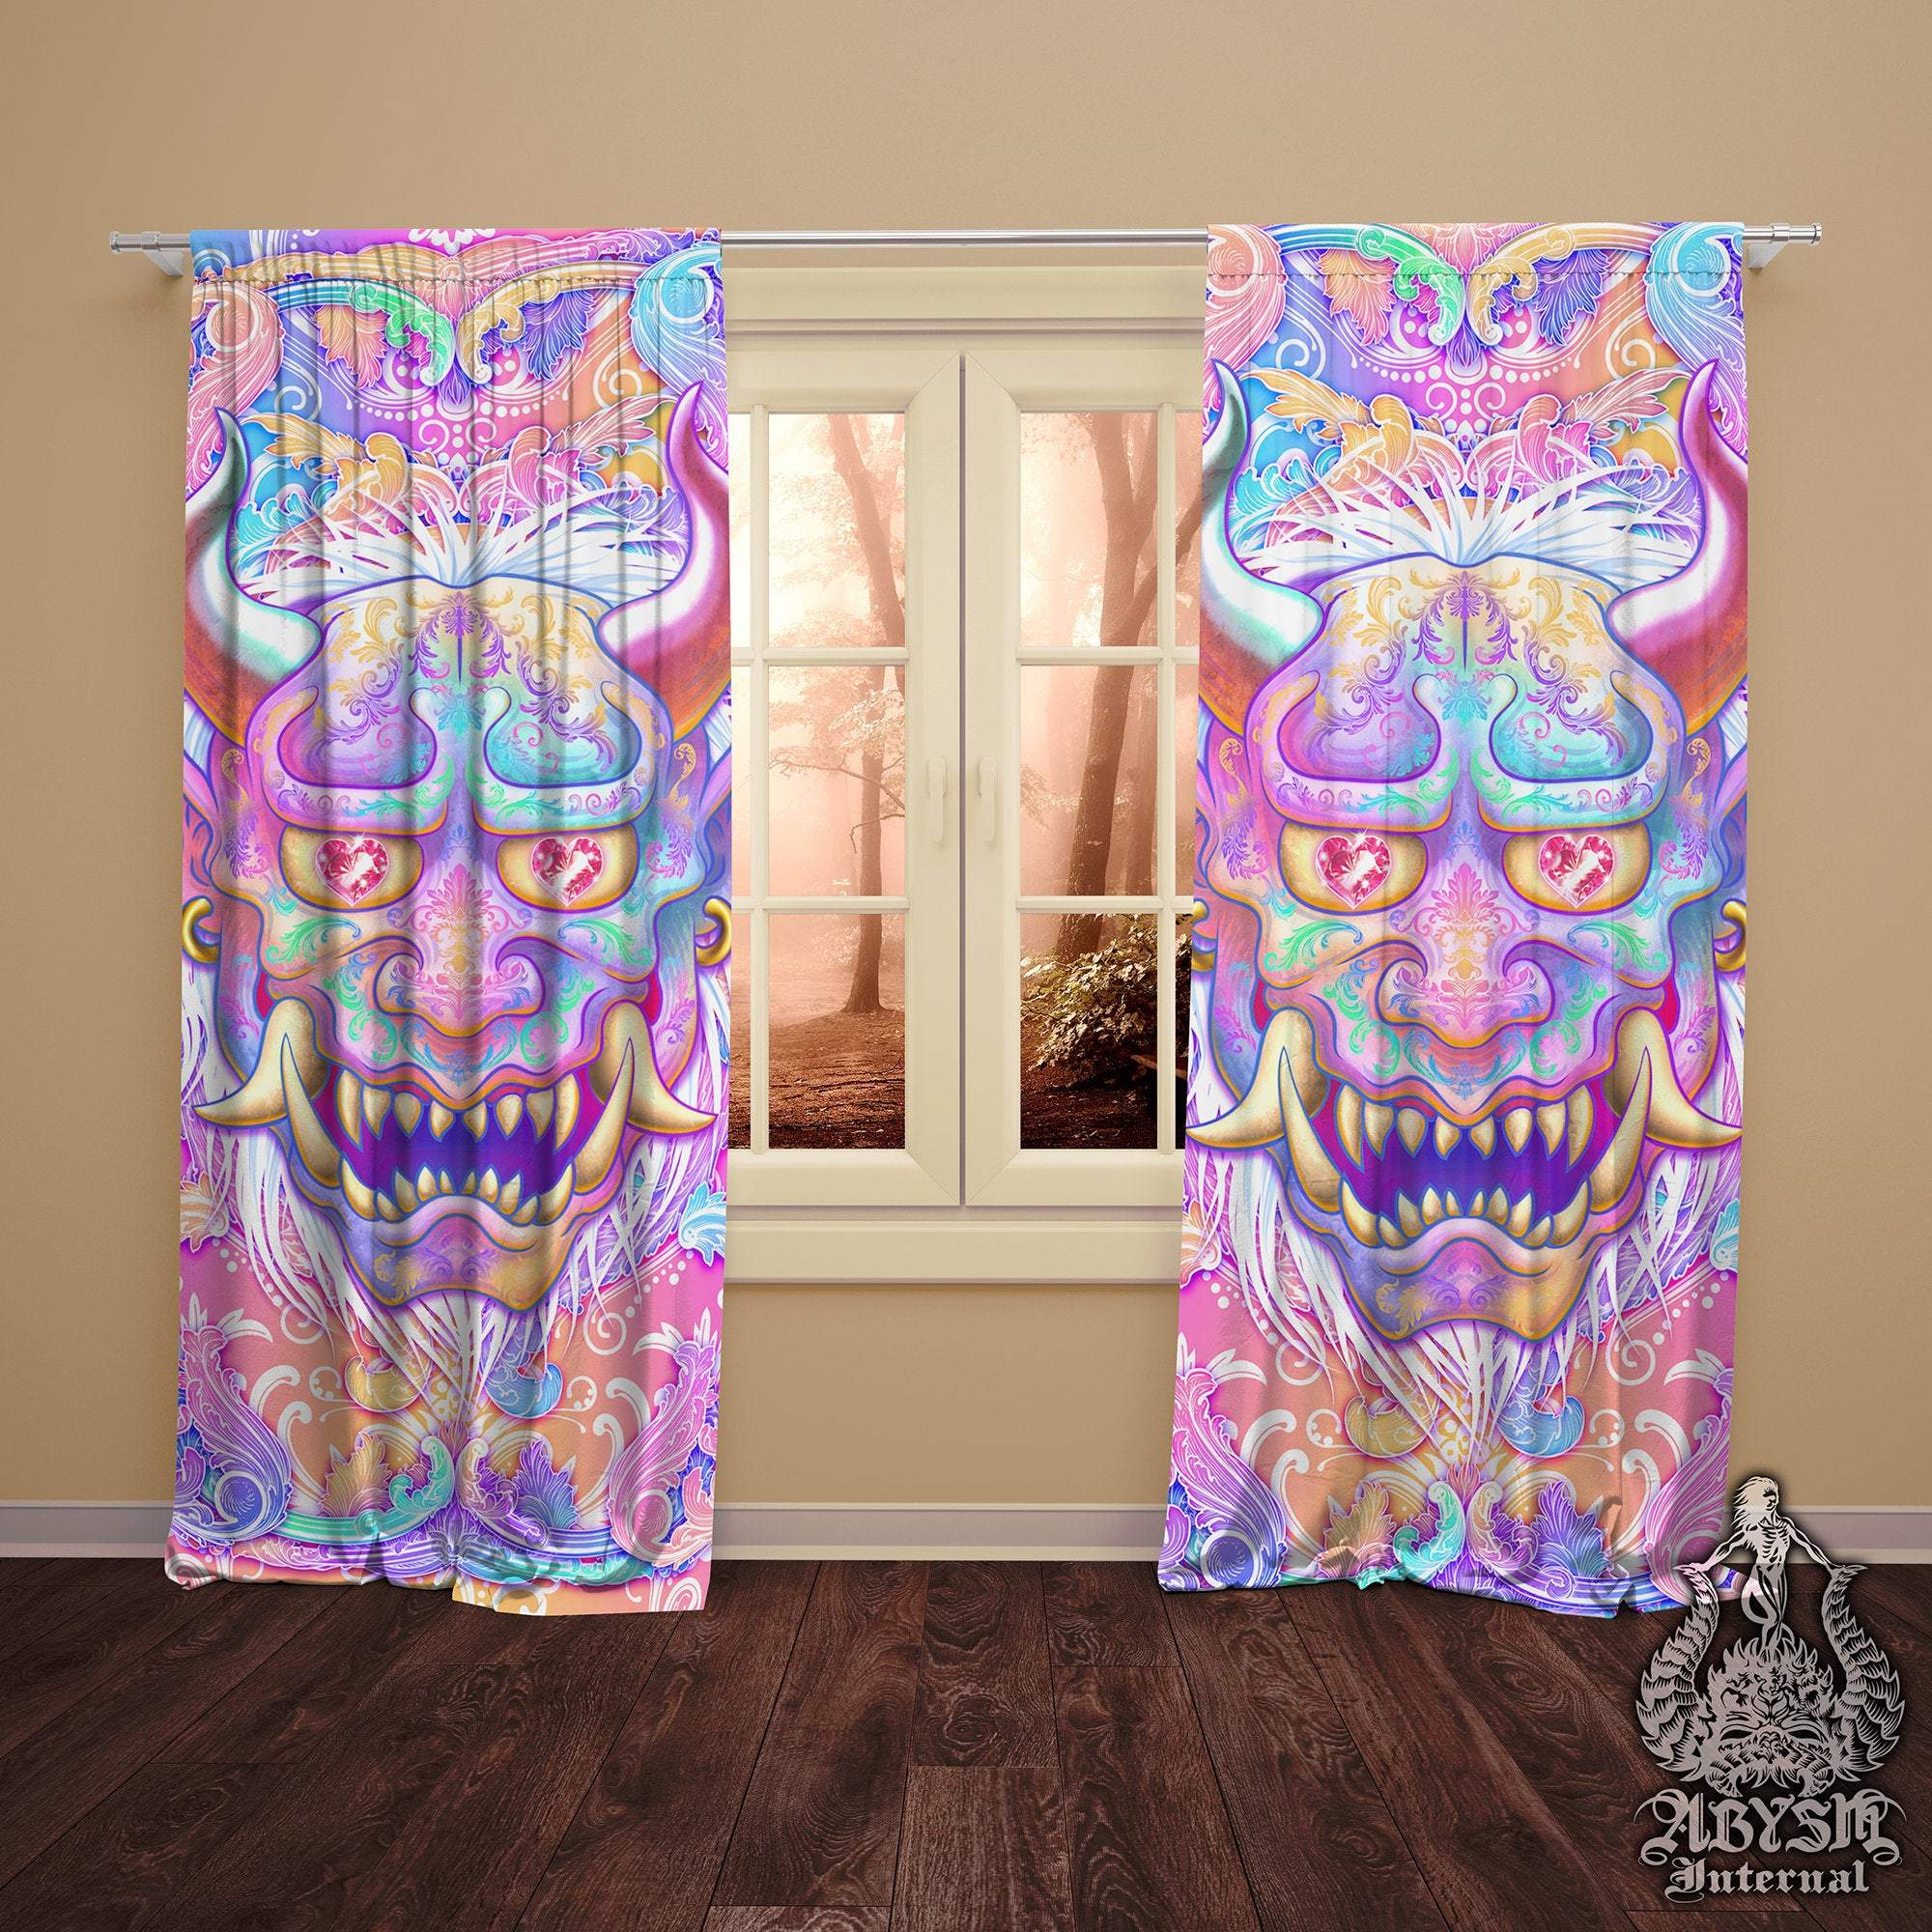 Kawaii Blackout Curtains, Long Window Panels, Japanese Demon, Psychedelic, Holographic and Aesthetic Room Decor, Art Print, Funky and Eclectic Home Decor - Pastel Oni - Abysm Internal